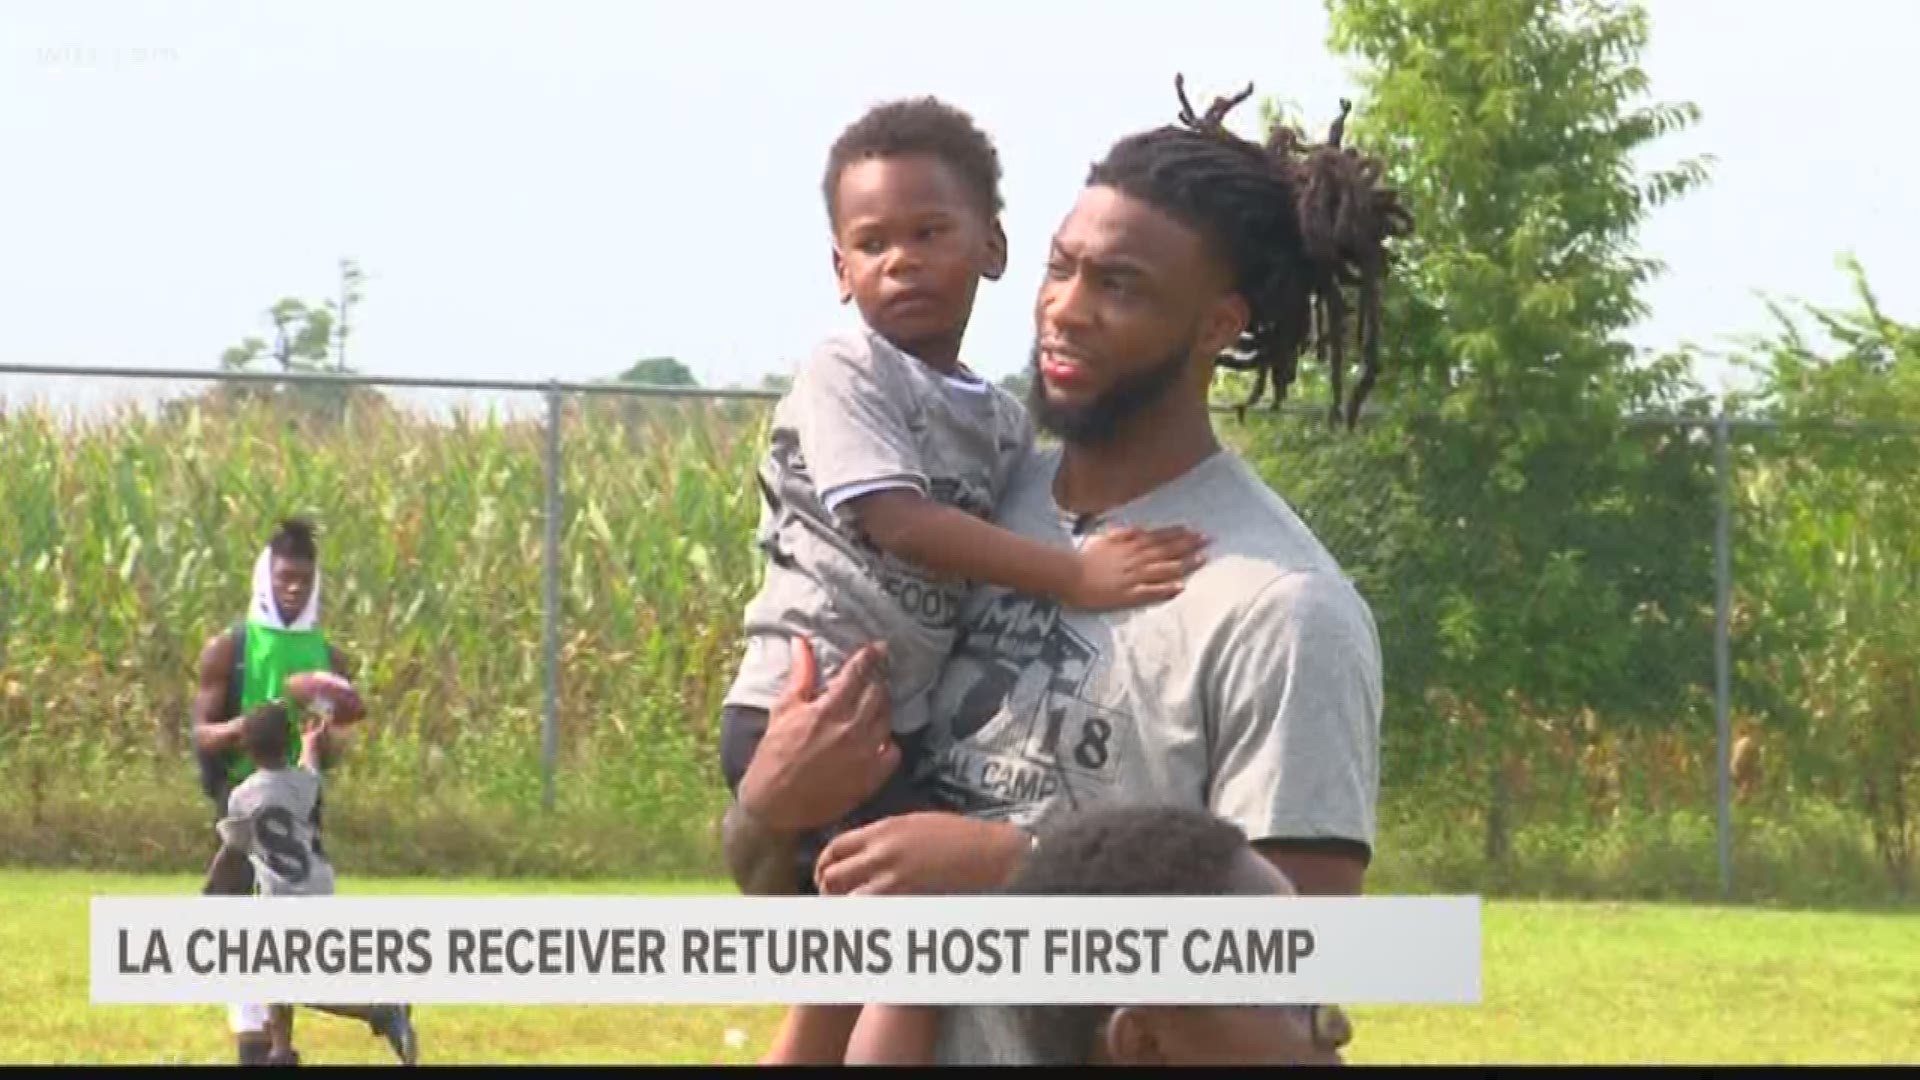 LA Chargers wide receiver Mike Williams came back to his alma mater, Lake Marion High School, to give back to the community that helped make him a Clemson standout and first round NFL draft pick. His youth football camp also has some ties to the Gamecocks